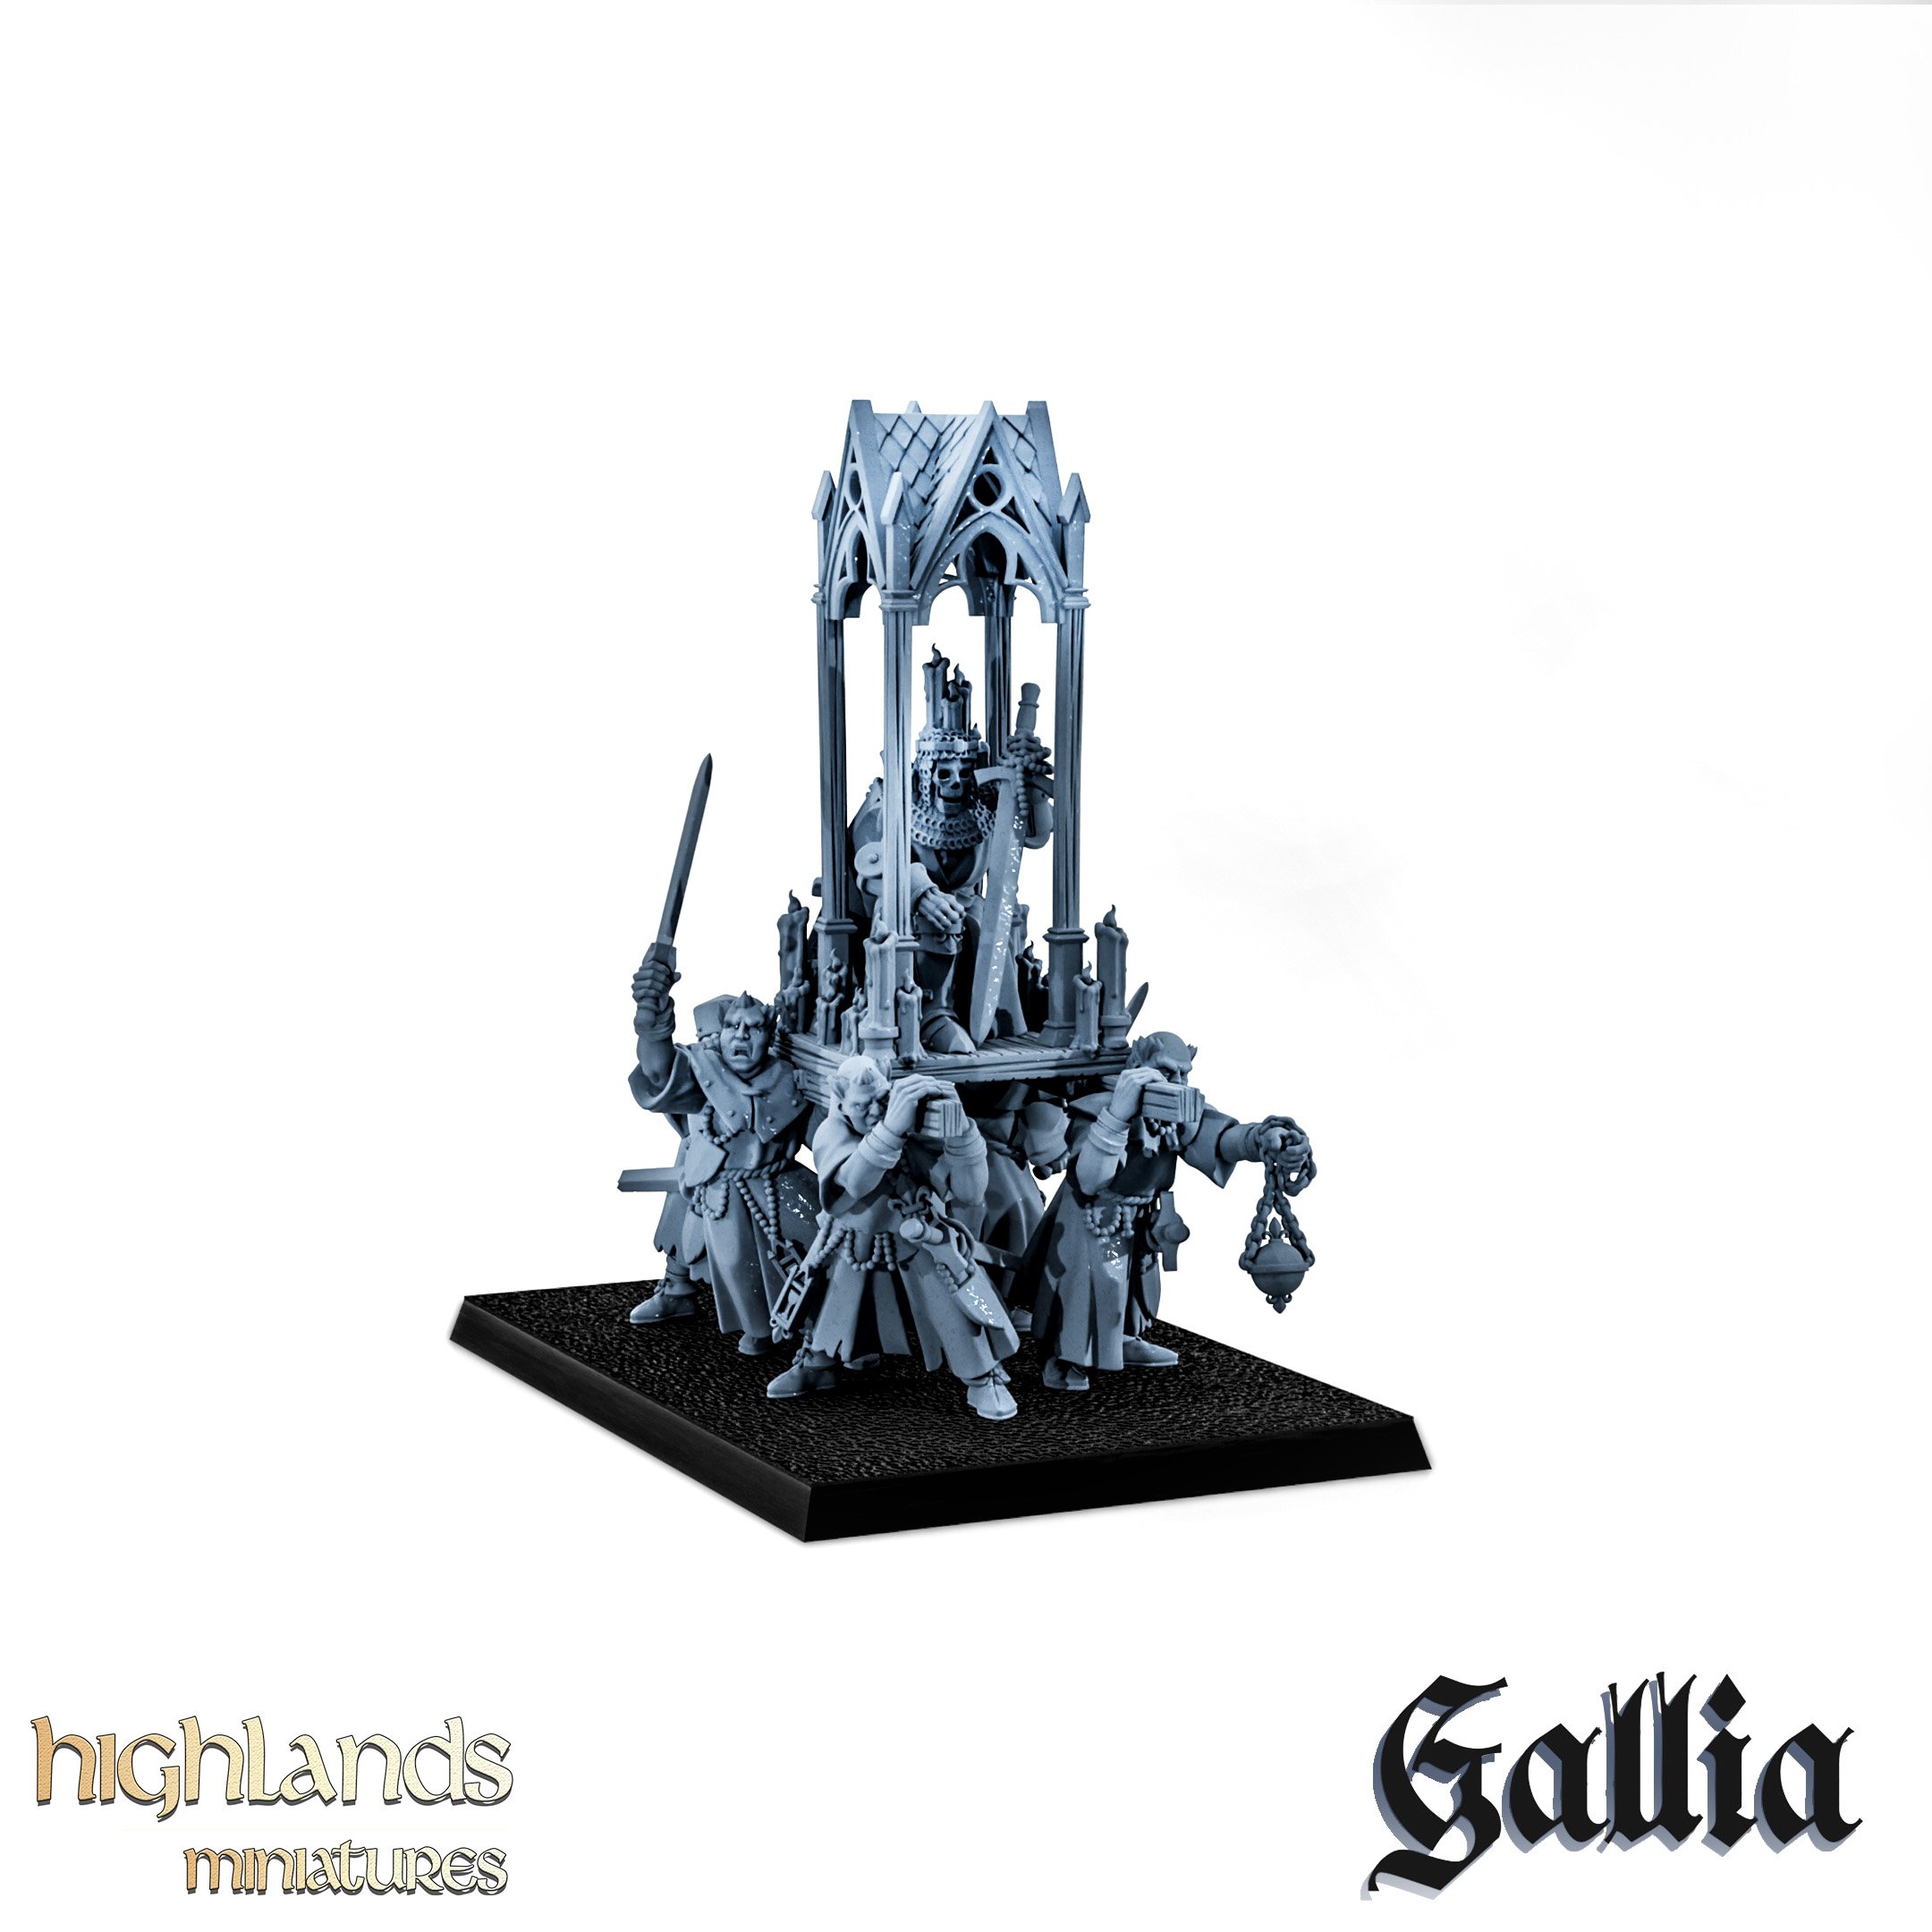 Grail Reliquary fantasy wargaming miniature designed by Highlands Miniatures 3D printed by Forgemaster Miniatures